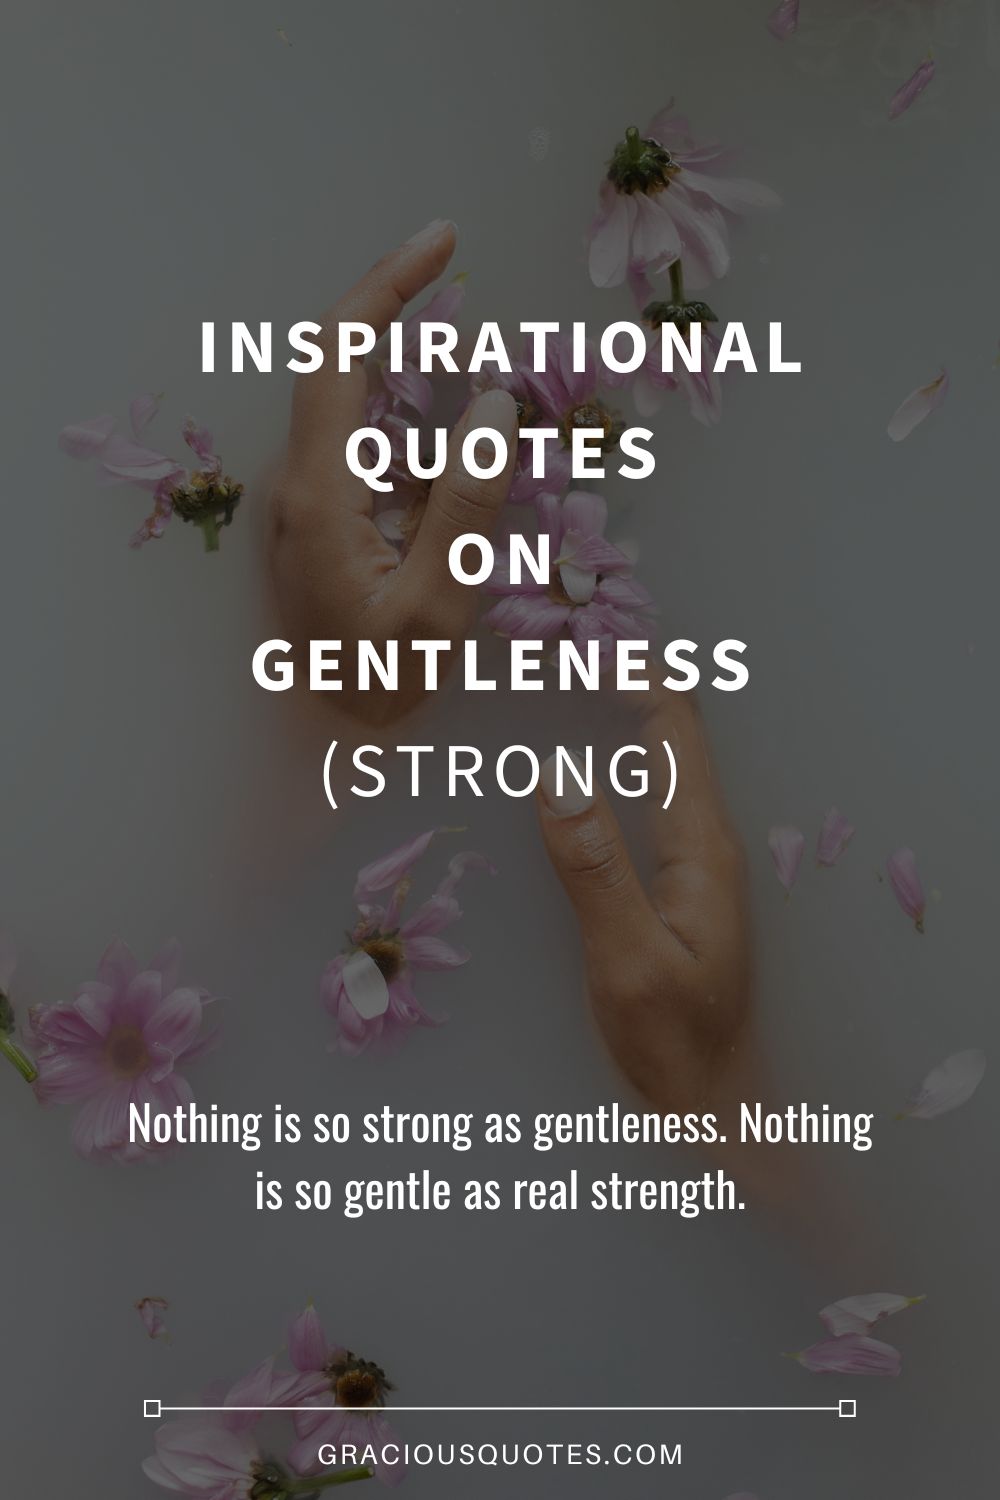 Inspirational Quotes on Gentleness (STRONG) - Gracious Quotes